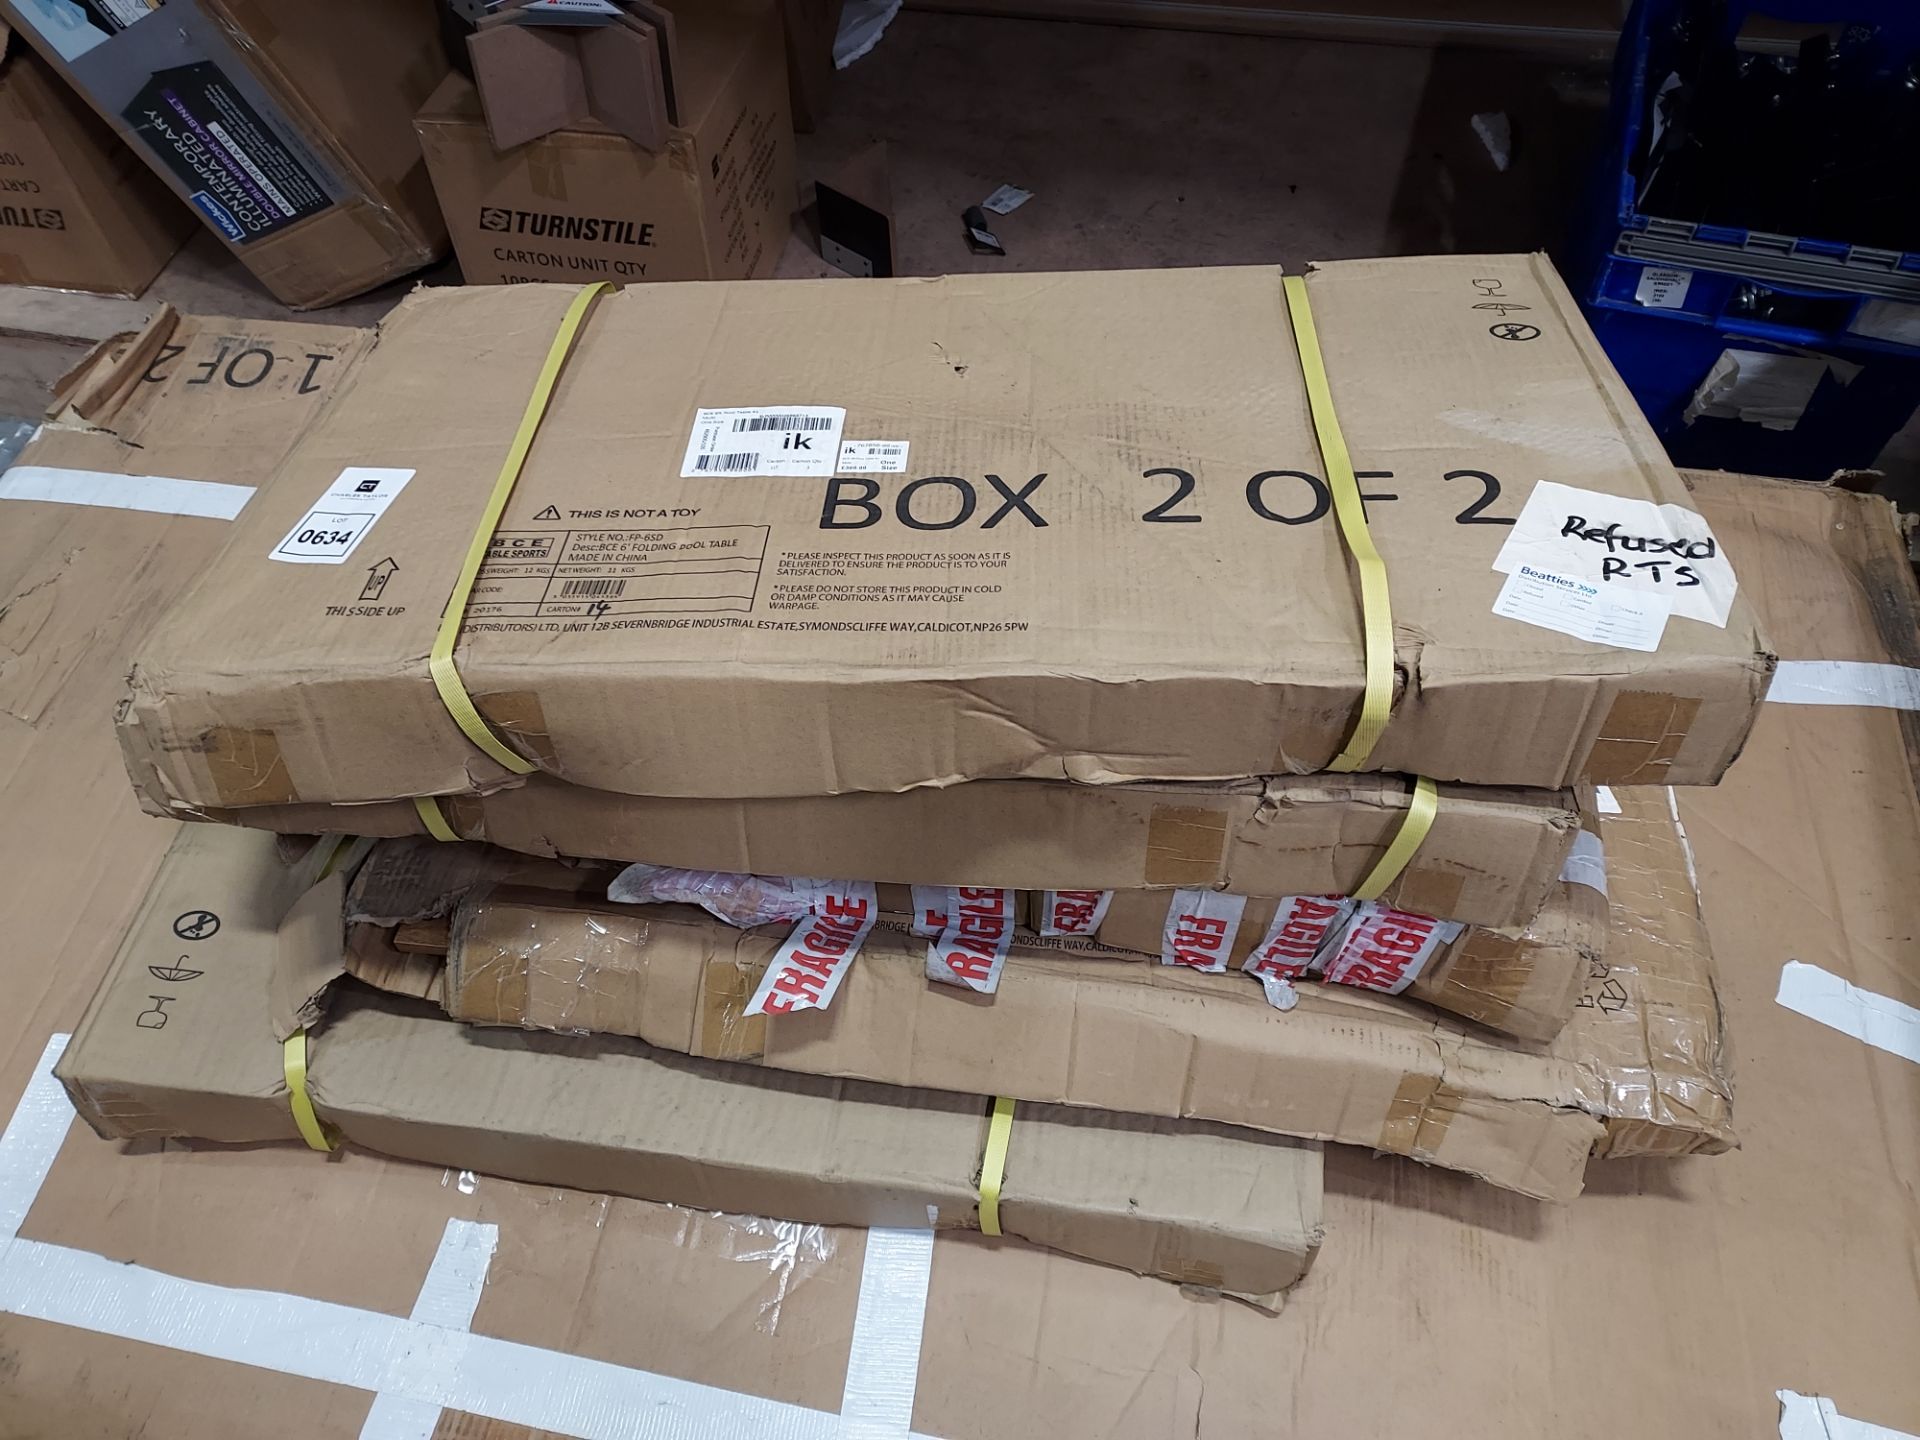 2 X BCE 6FT FOLDING POOL TABLE IN 4 BOXES (NOTE CUSTOMER RETURNS) - Image 2 of 2